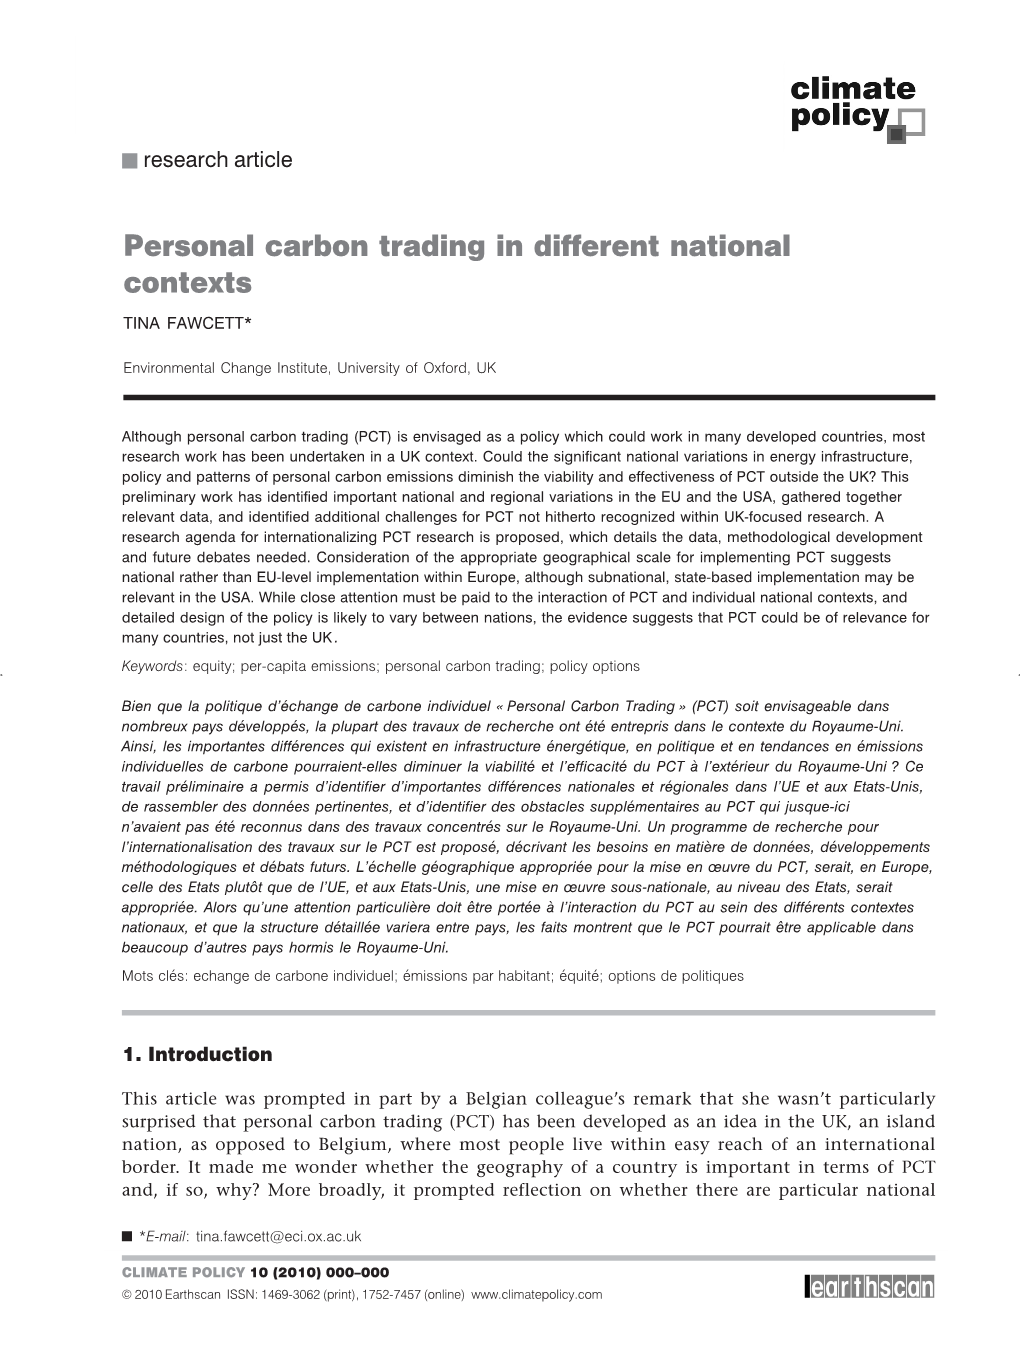 Personal Carbon Trading in Different National Contexts